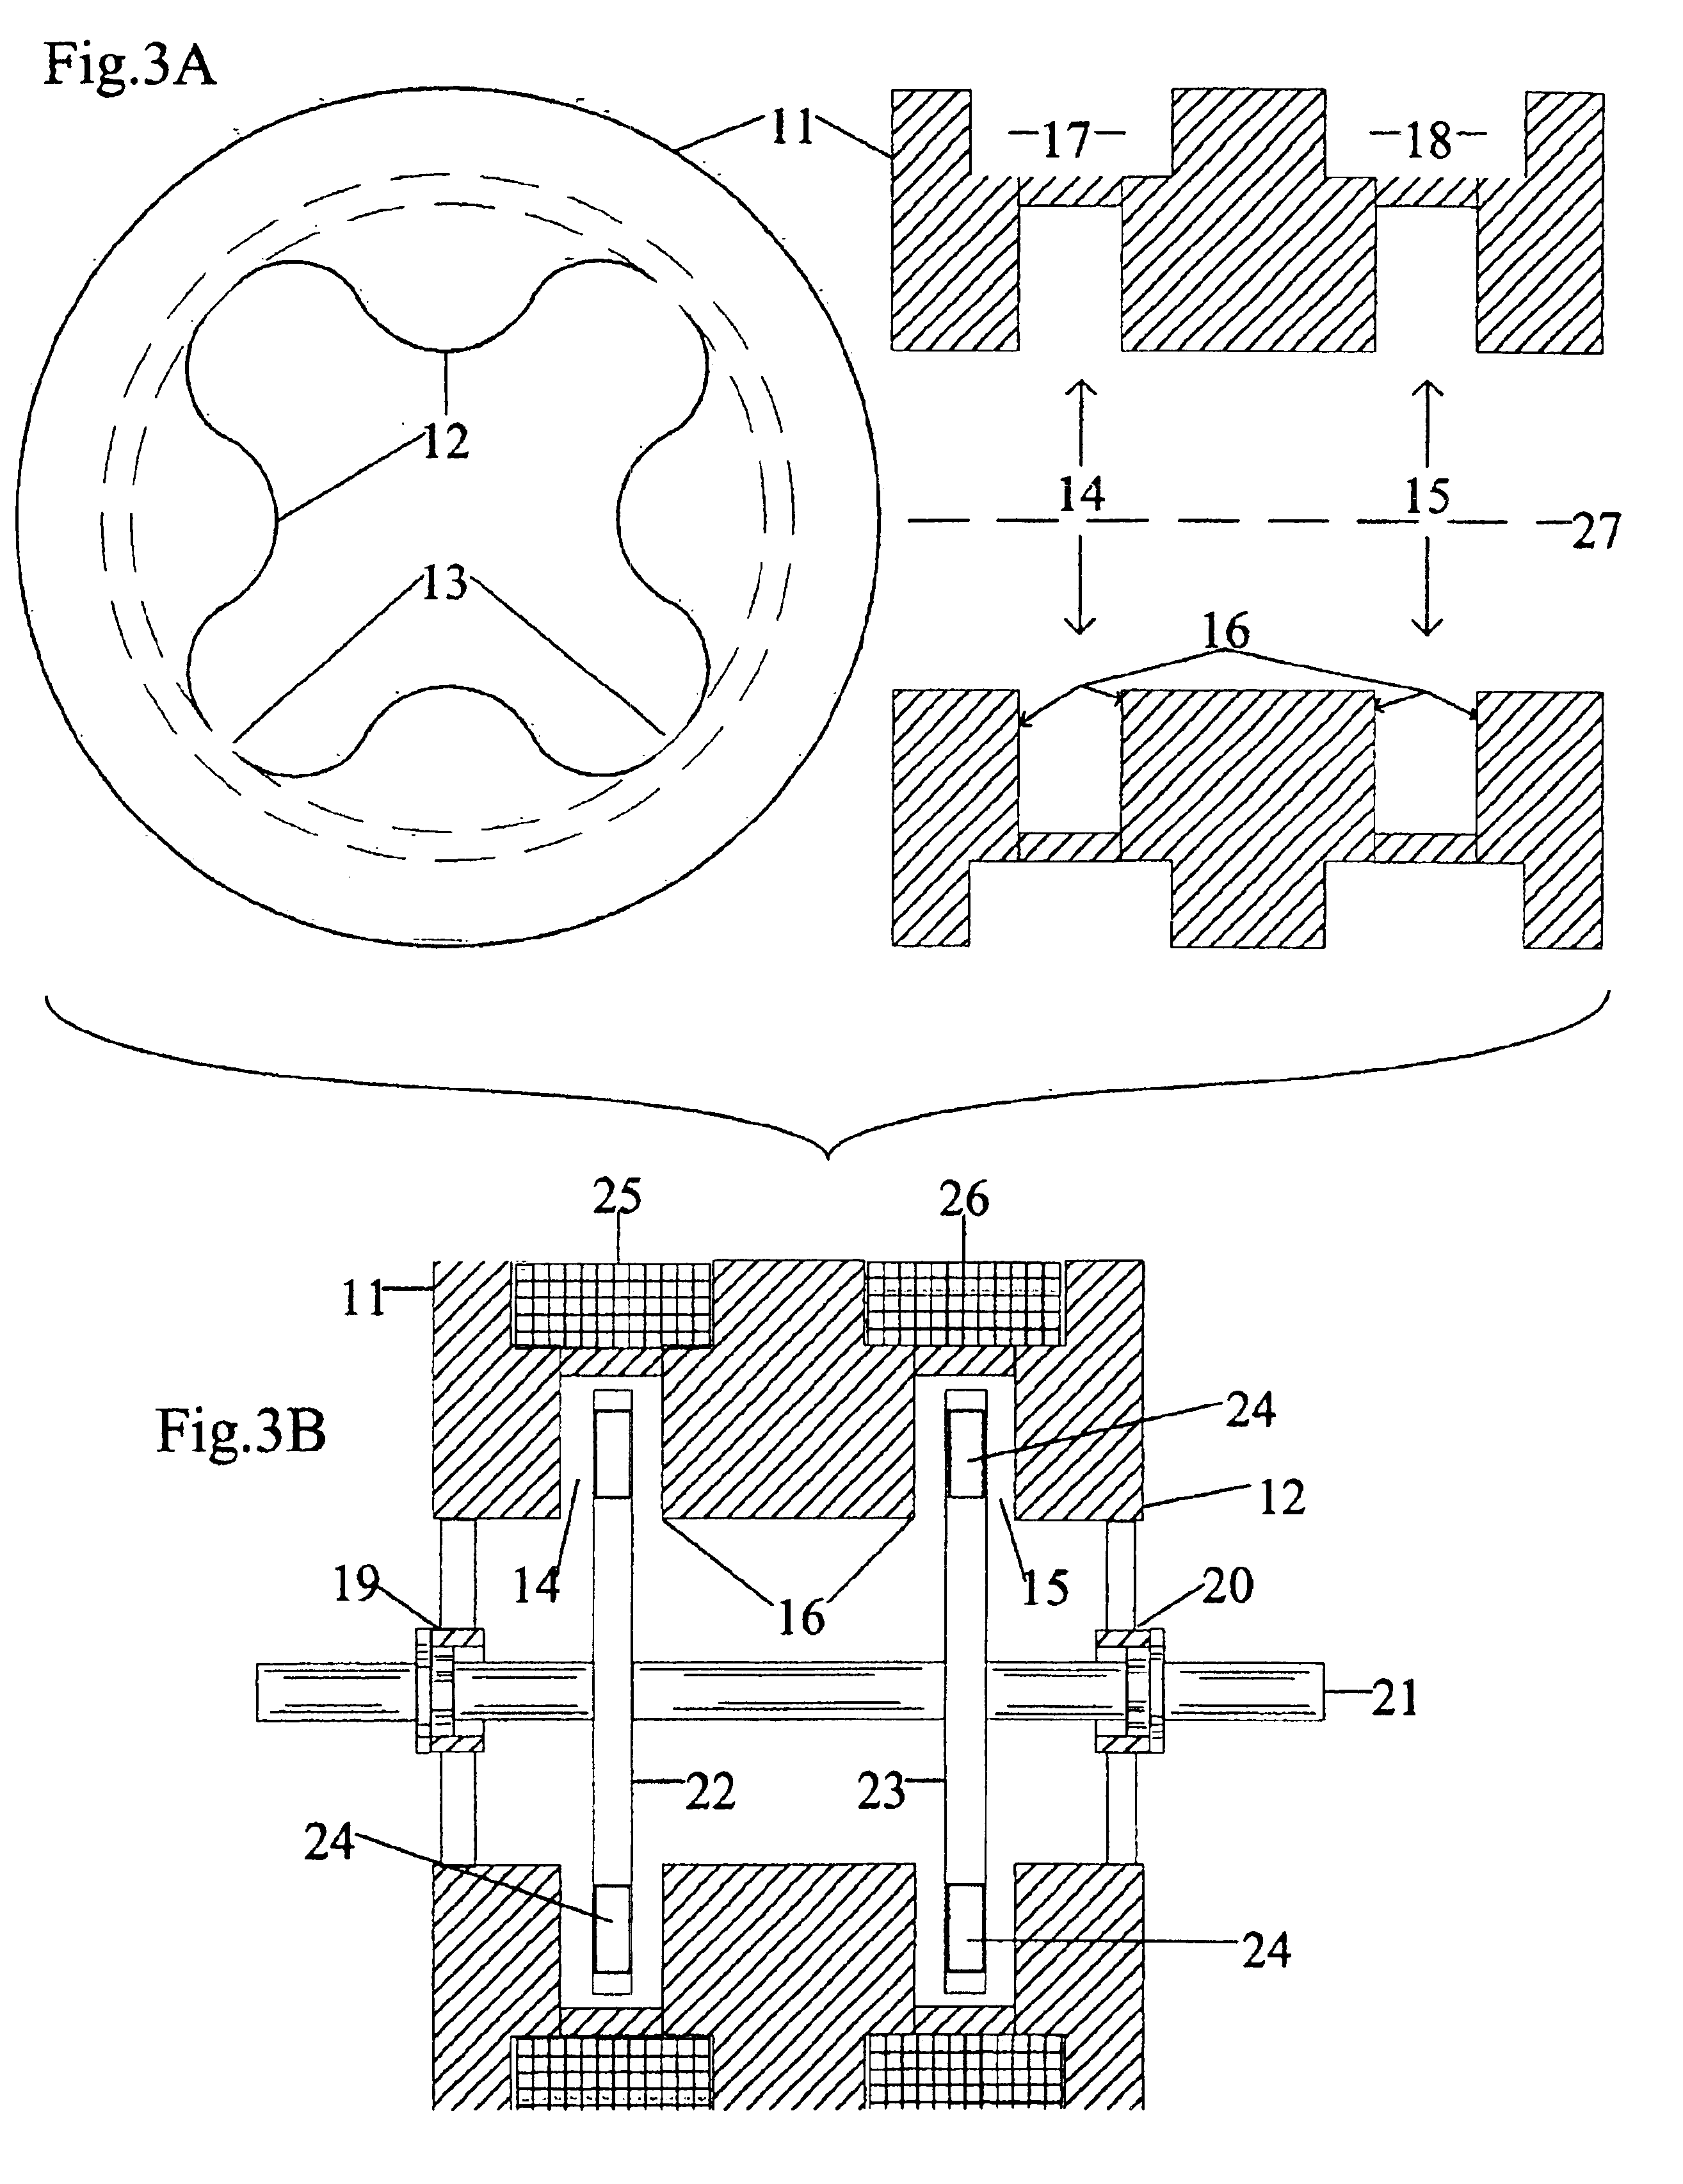 Axial flux motor with active flux shaping